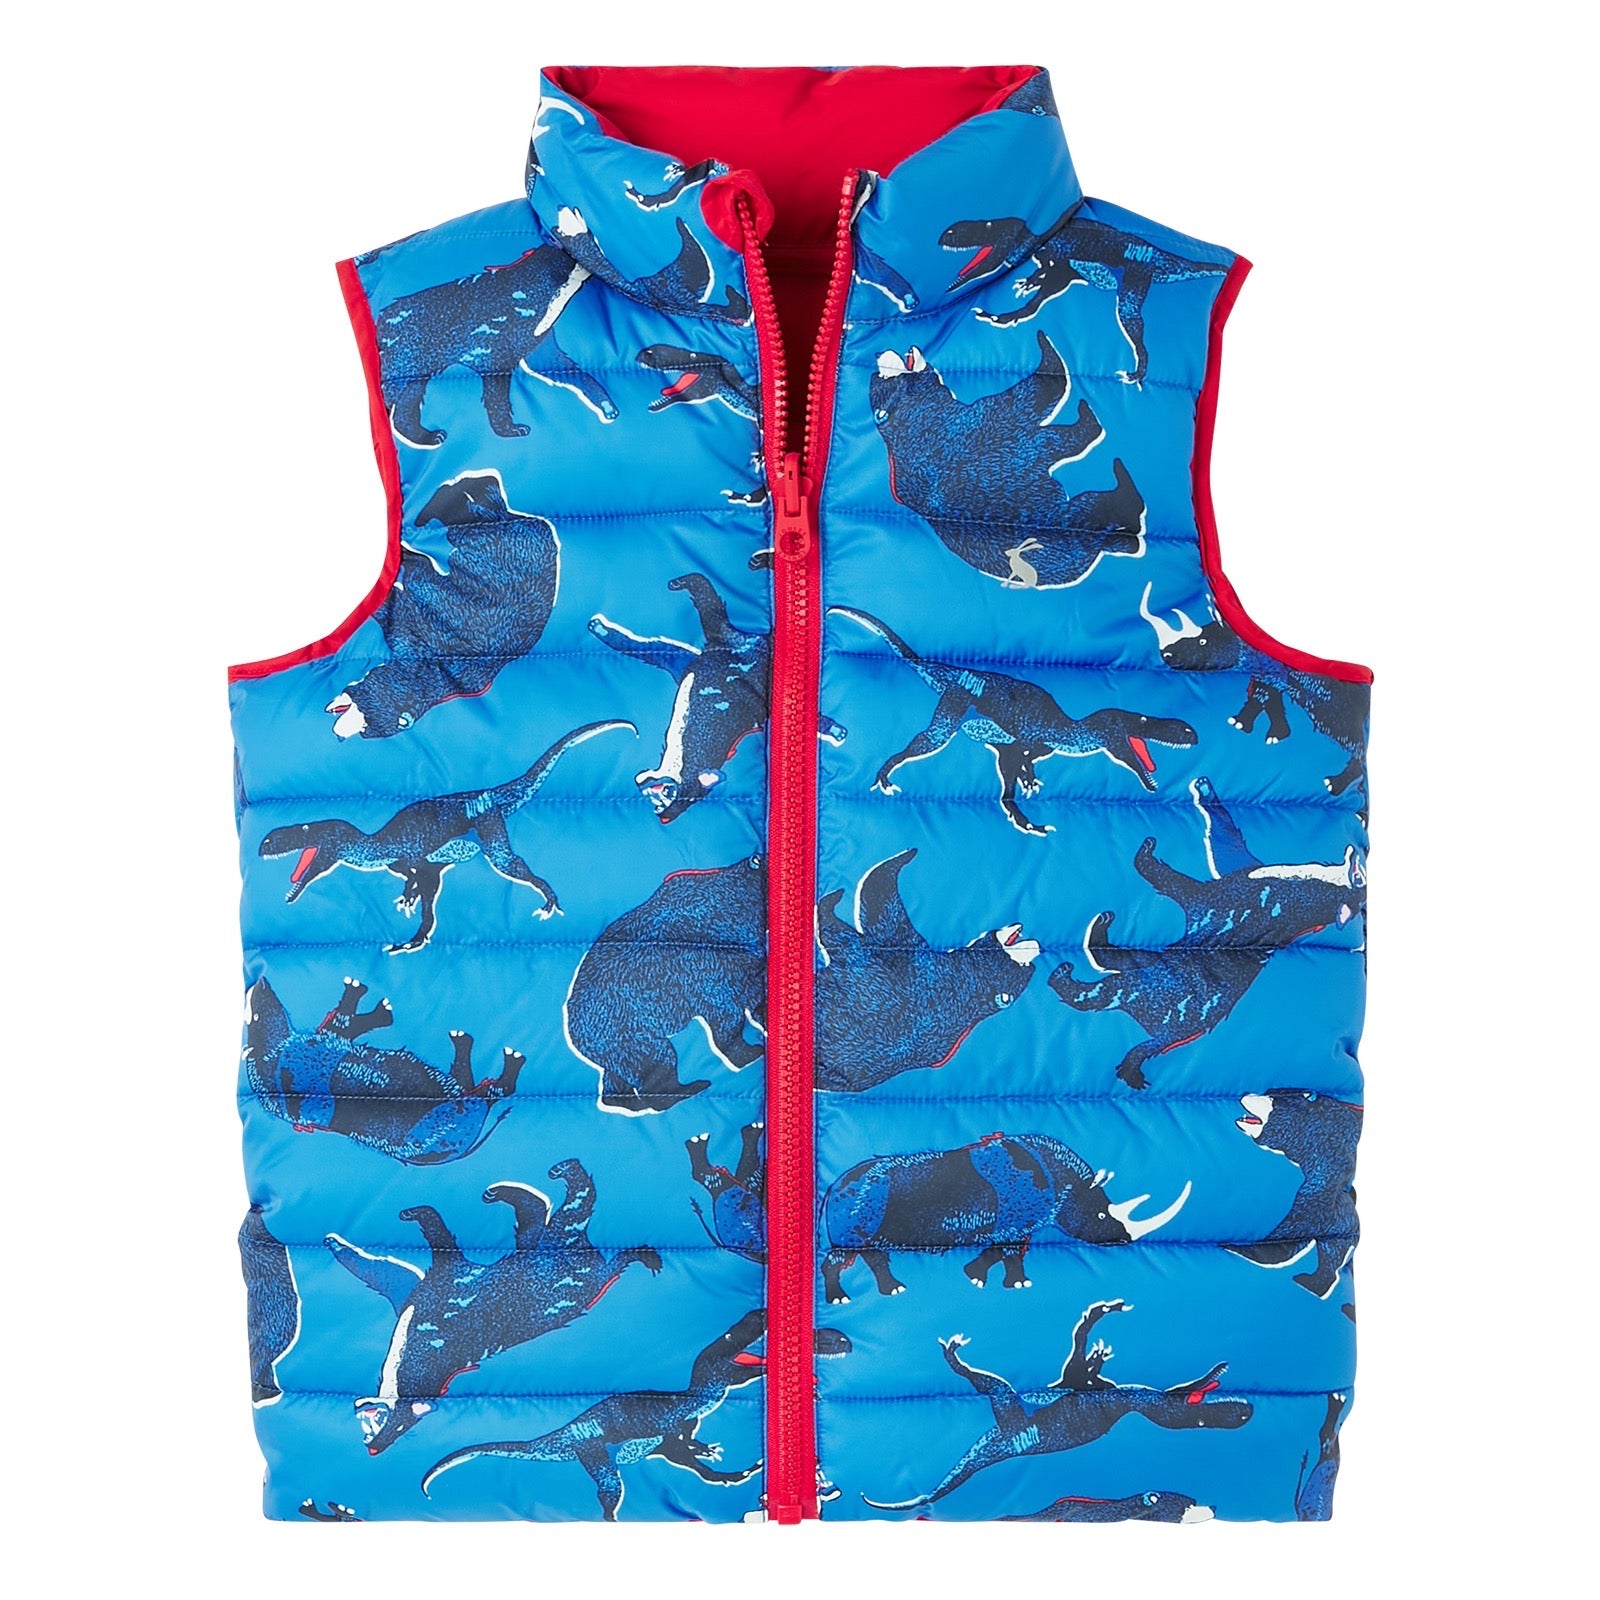 Joules Flip It Gilet 217011 Blue Animals Clothing 3YRS / Blue,4YRS / Blue,5YRS / Blue,6YRS / Blue,8YRS / Blue,9-10YRS / Blue